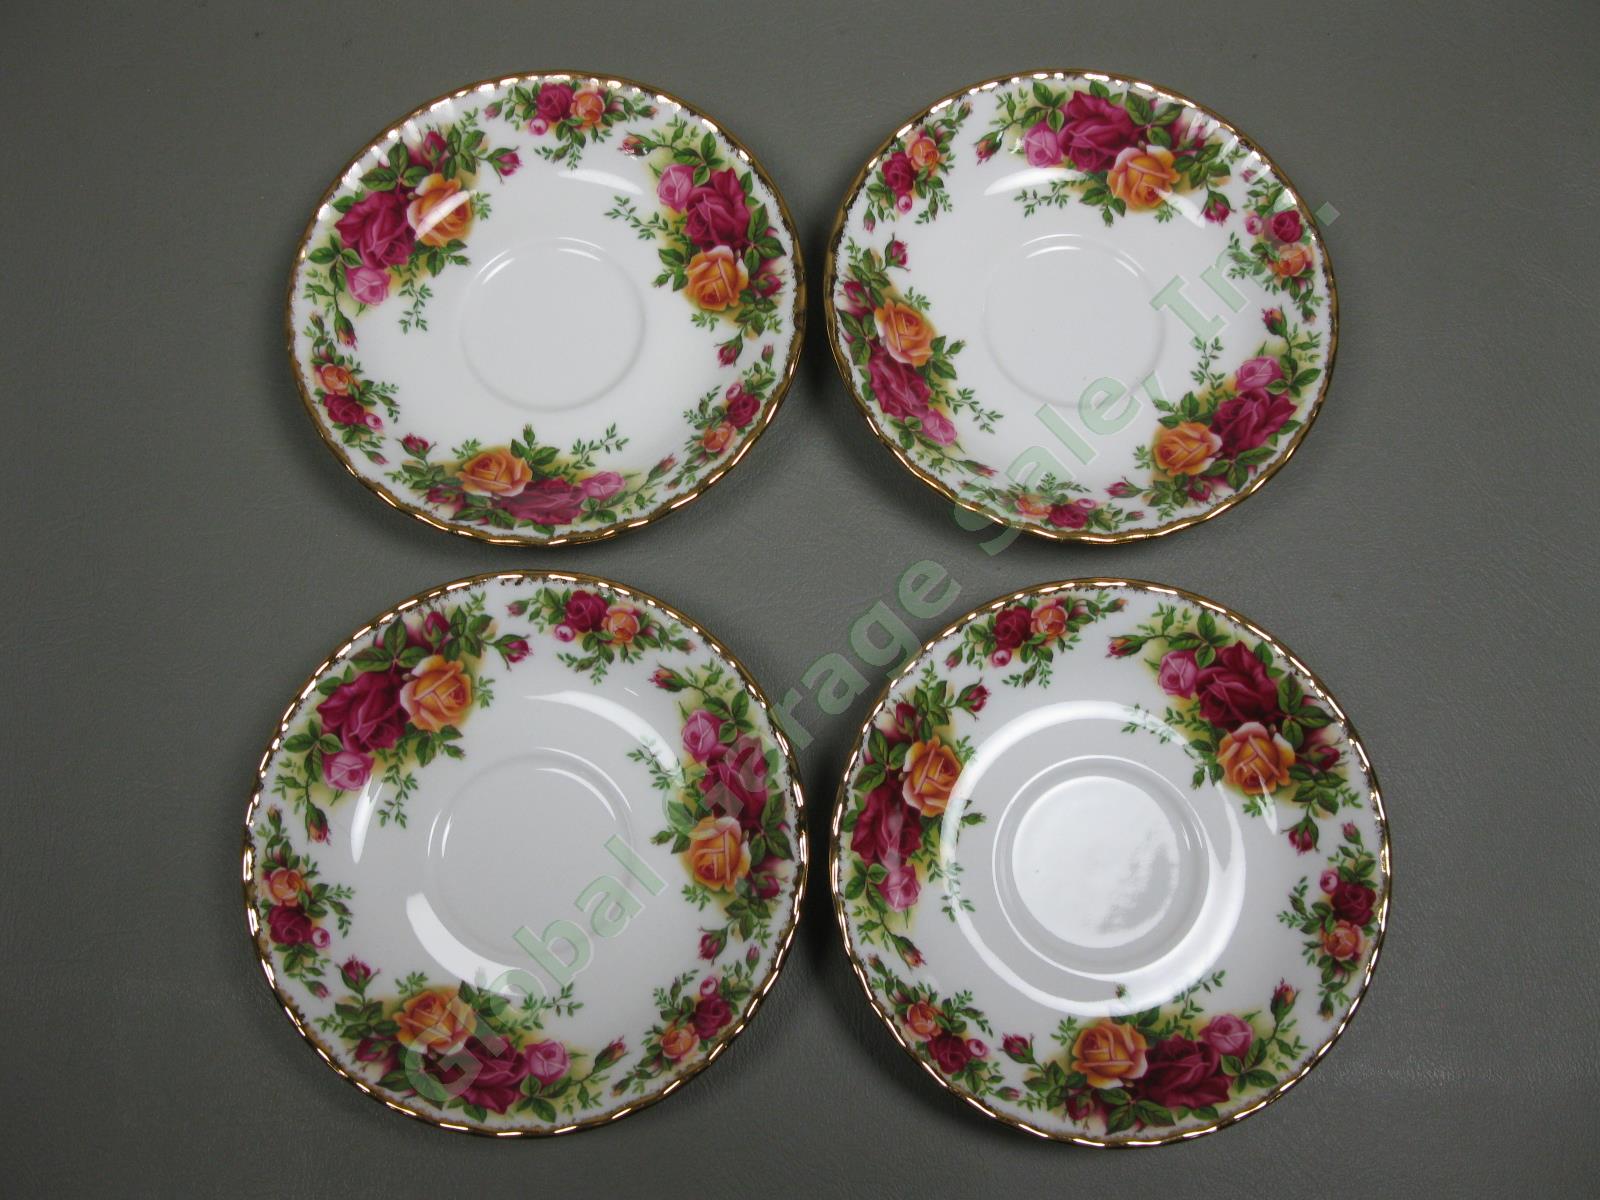 8 Royal Albert Old Country Roses Footed Tea Cup/Saucer Gold Trim Bone China Set 19